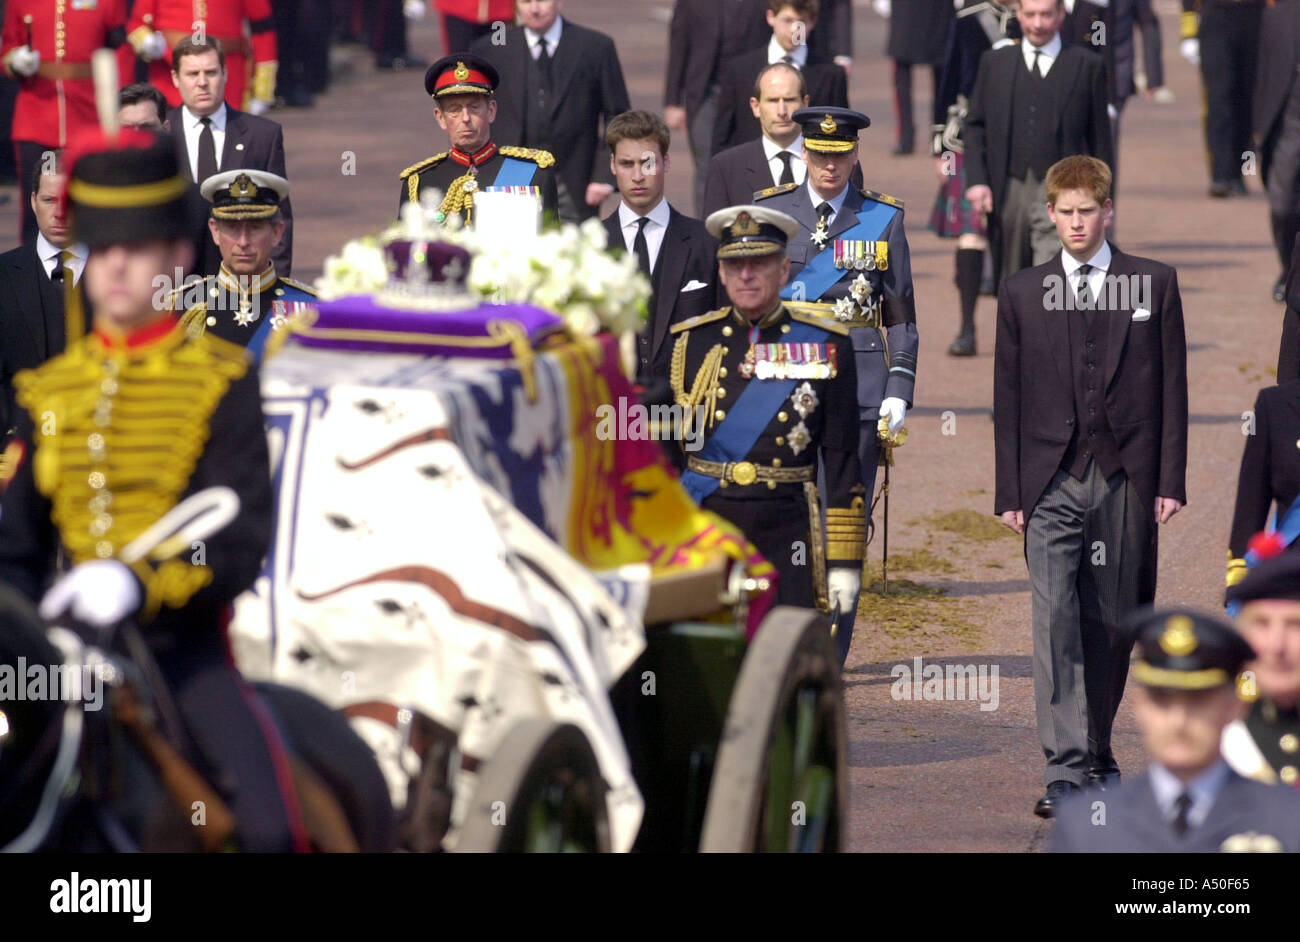 Prince Charles Prince William and Prince Harry march solemnly behind the Queen Mothers coffin during her funeral procession Stock Photo